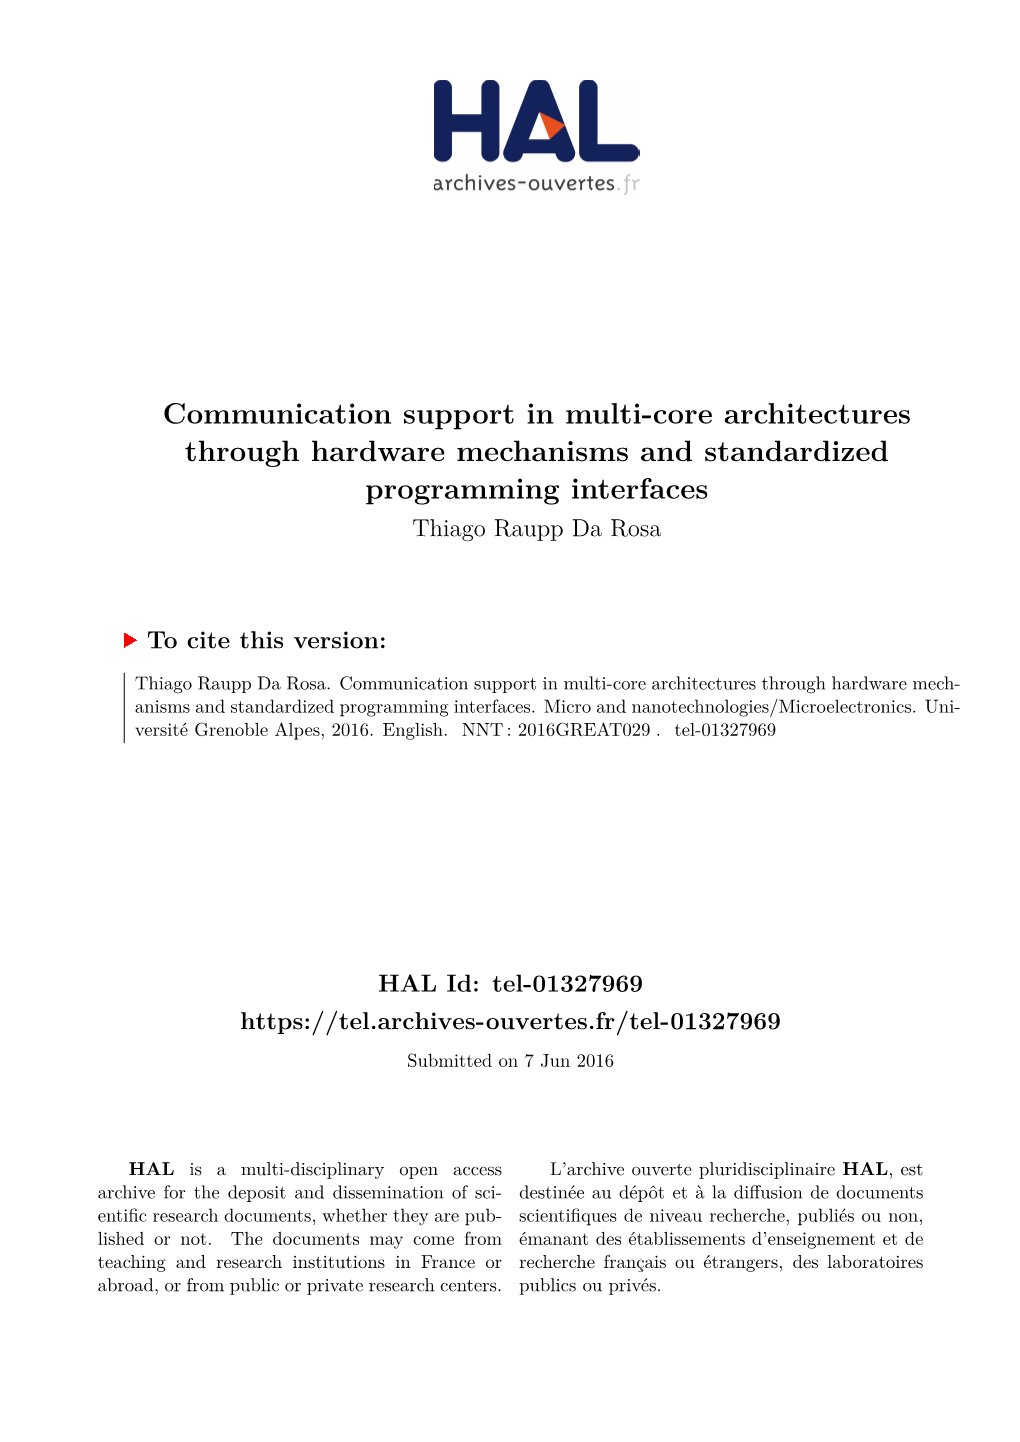 Communication Support in Multi-Core Architectures Through Hardware Mechanisms and Standardized Programming Interfaces Thiago Raupp Da Rosa